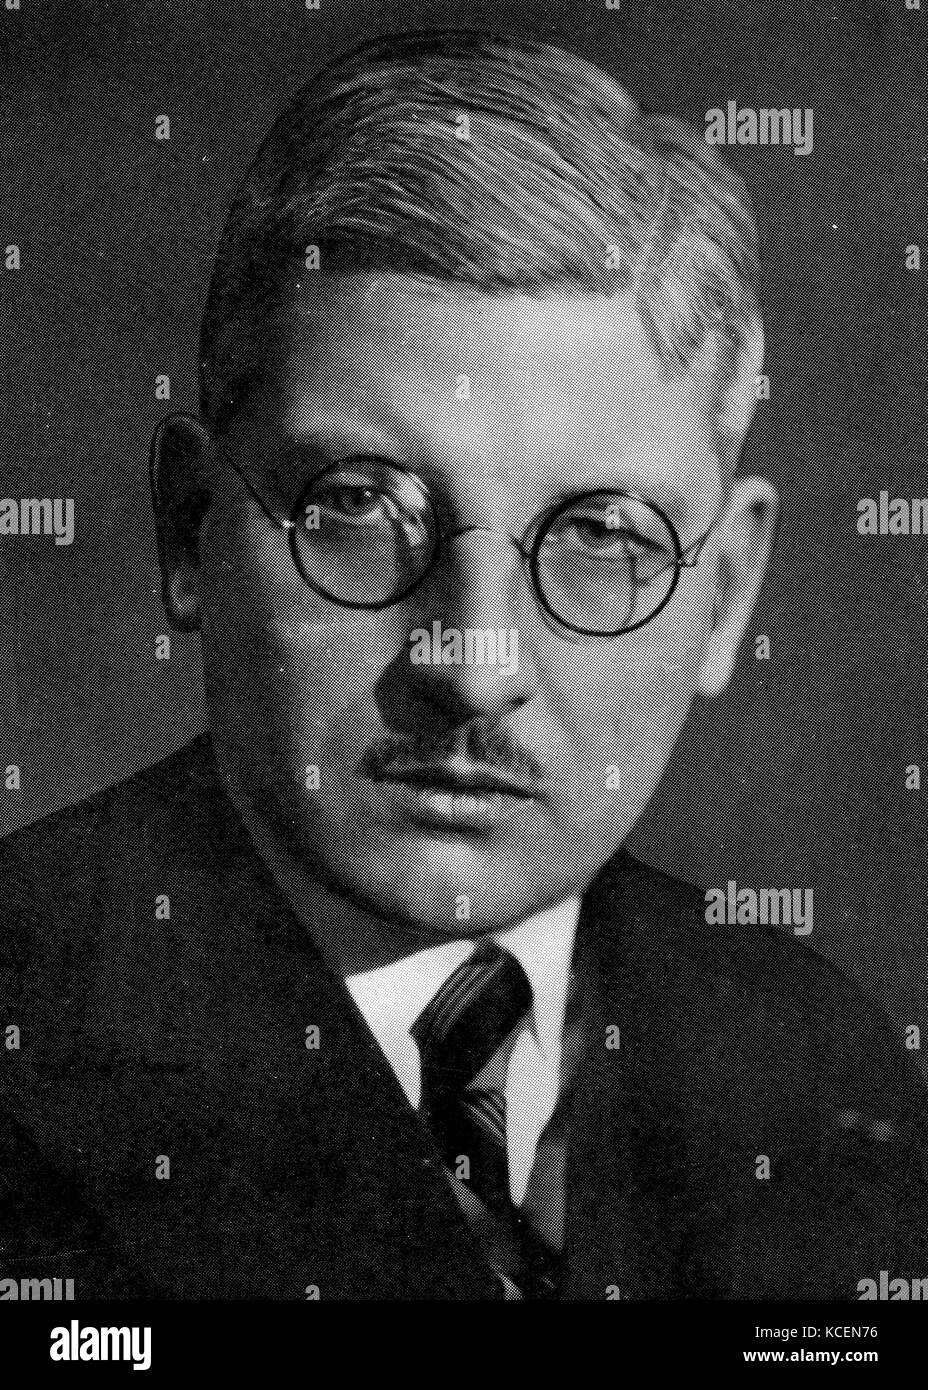 Kurt Alois Josef Johann Schuschnigg, (1897 – 1977) Chancellor of Austria from the 1934 to 1938. He was opposed to Hitler's ambitions to absorb Austria into the Third Reich. Stock Photo